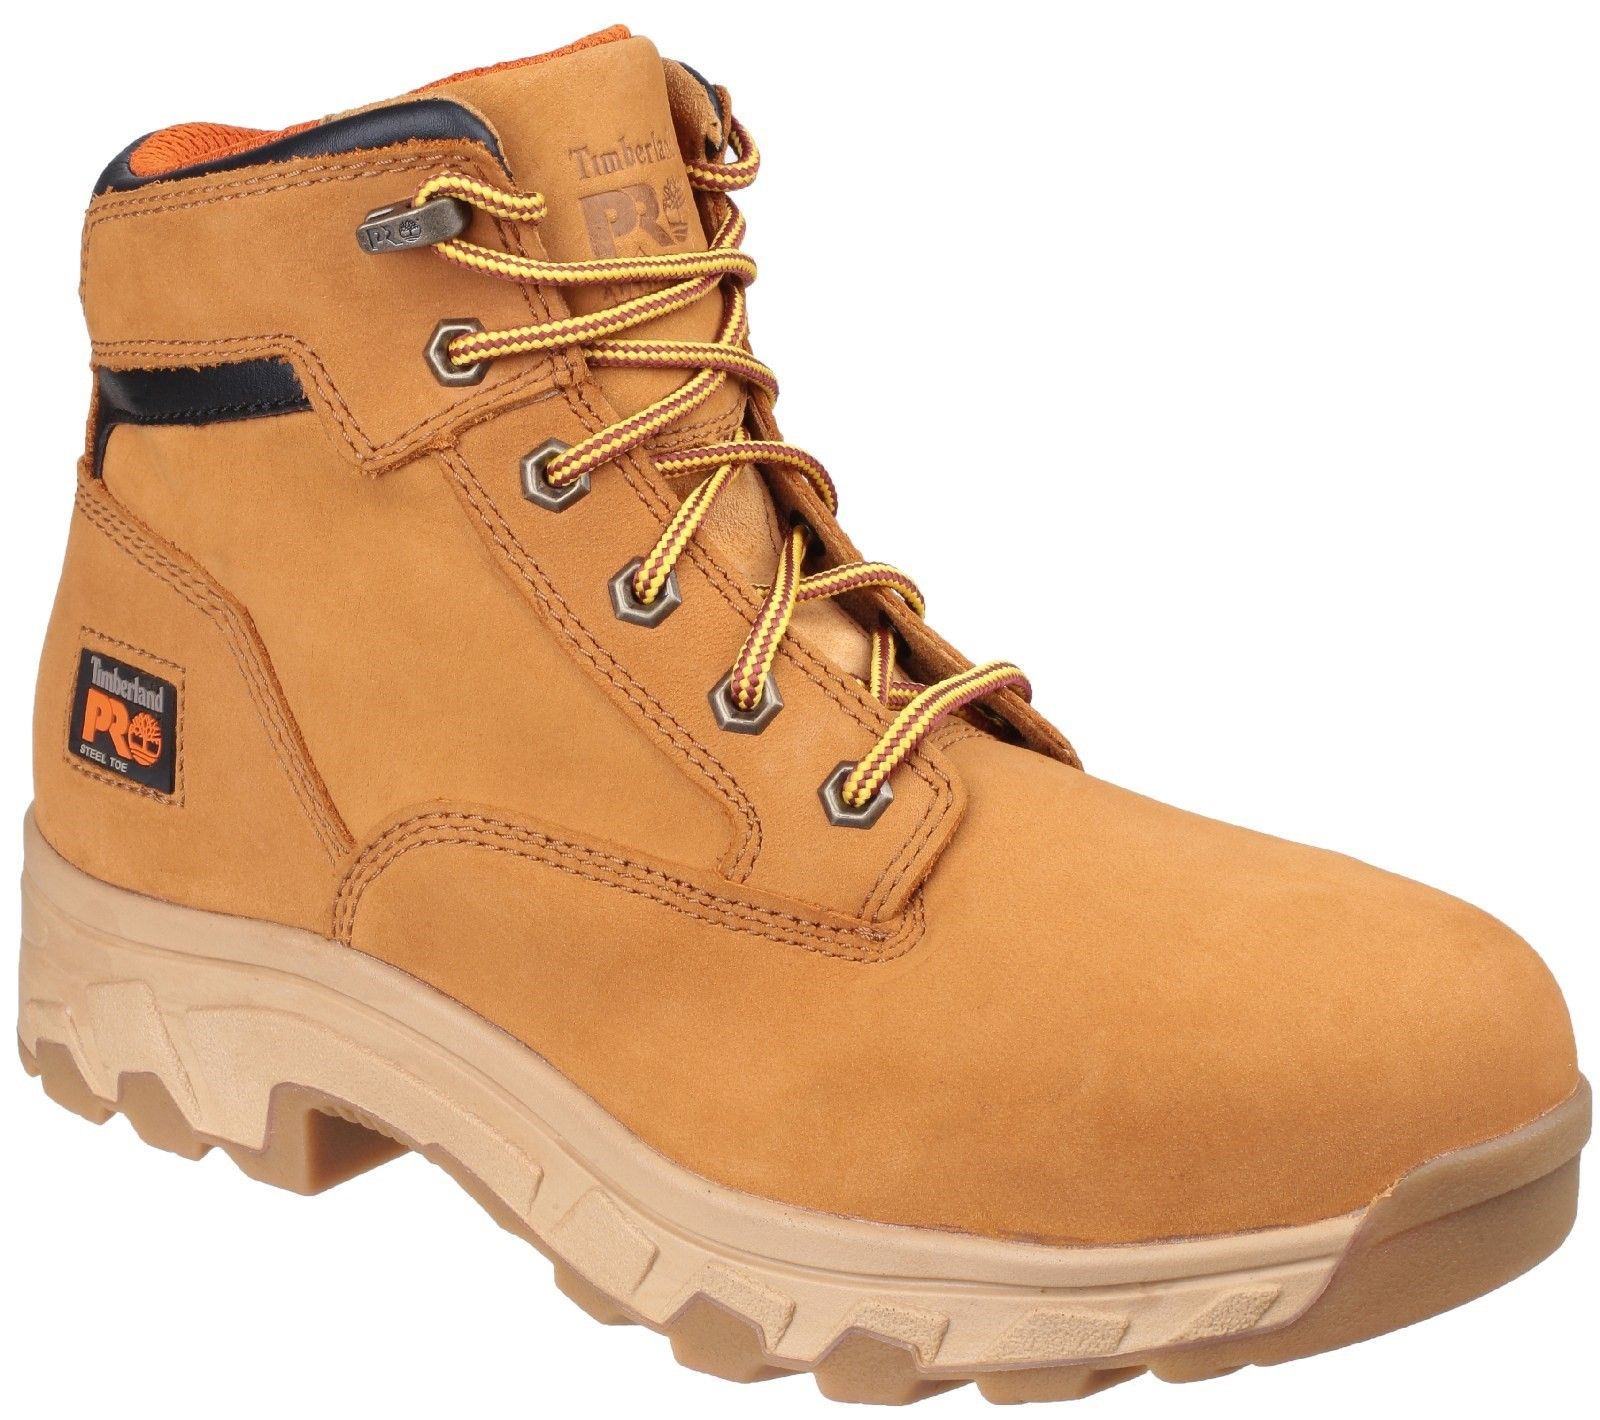 MADE TO WORK: The Timberland PRO Workstead collection features premium, waterproof leather, dual-purpose hardware and Anti-Fatigue Technology, giving it the style and protection you need to feel comfortable and protected all day long.Timberland PRO Workstead work boots with impact and compression resistant toe cap. 
Anti-static with an energy absorbing heel. 
Water resistant upper. 
Cement construction for flexibility and reduced break-in time. 
Water resistant premium nubuck leather upper.